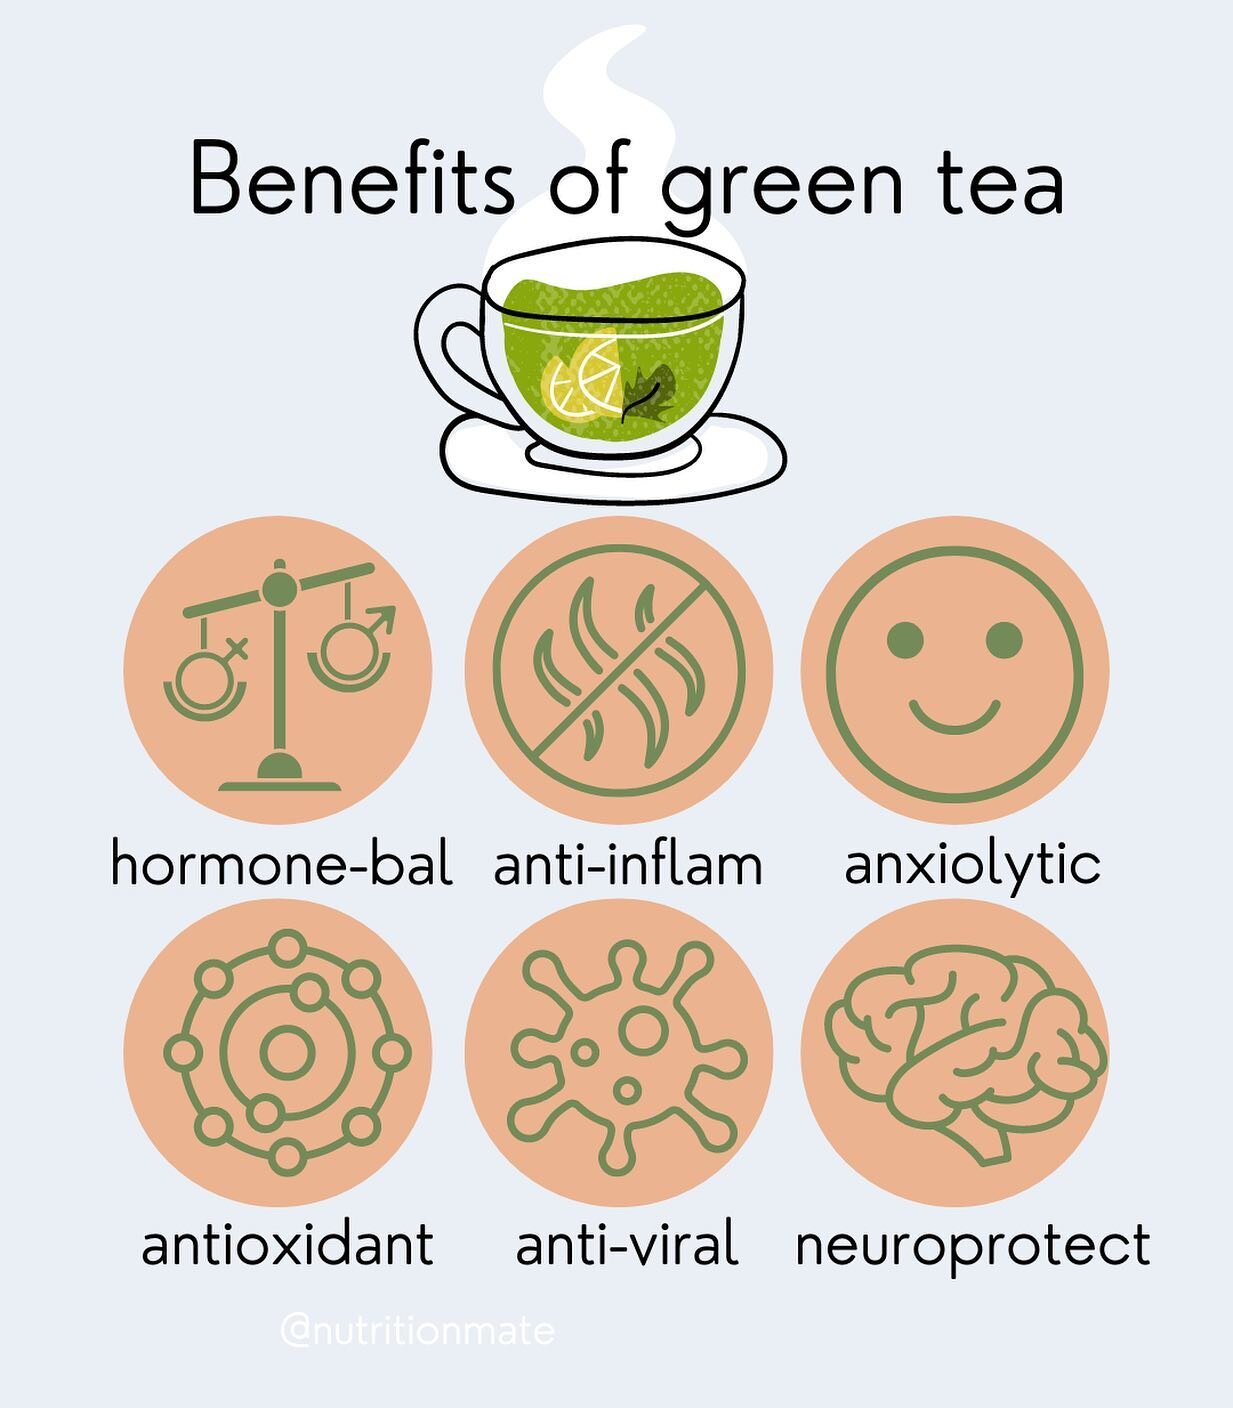 People either love or hate green tea. 
I wasn&rsquo;t a fan, but then I kept learning about all the incredible health benefits it possesses. Took a while, but I&rsquo;m happy to say, I now love it- I&rsquo;m even a matcha girl&hellip;who dis?

Here&r